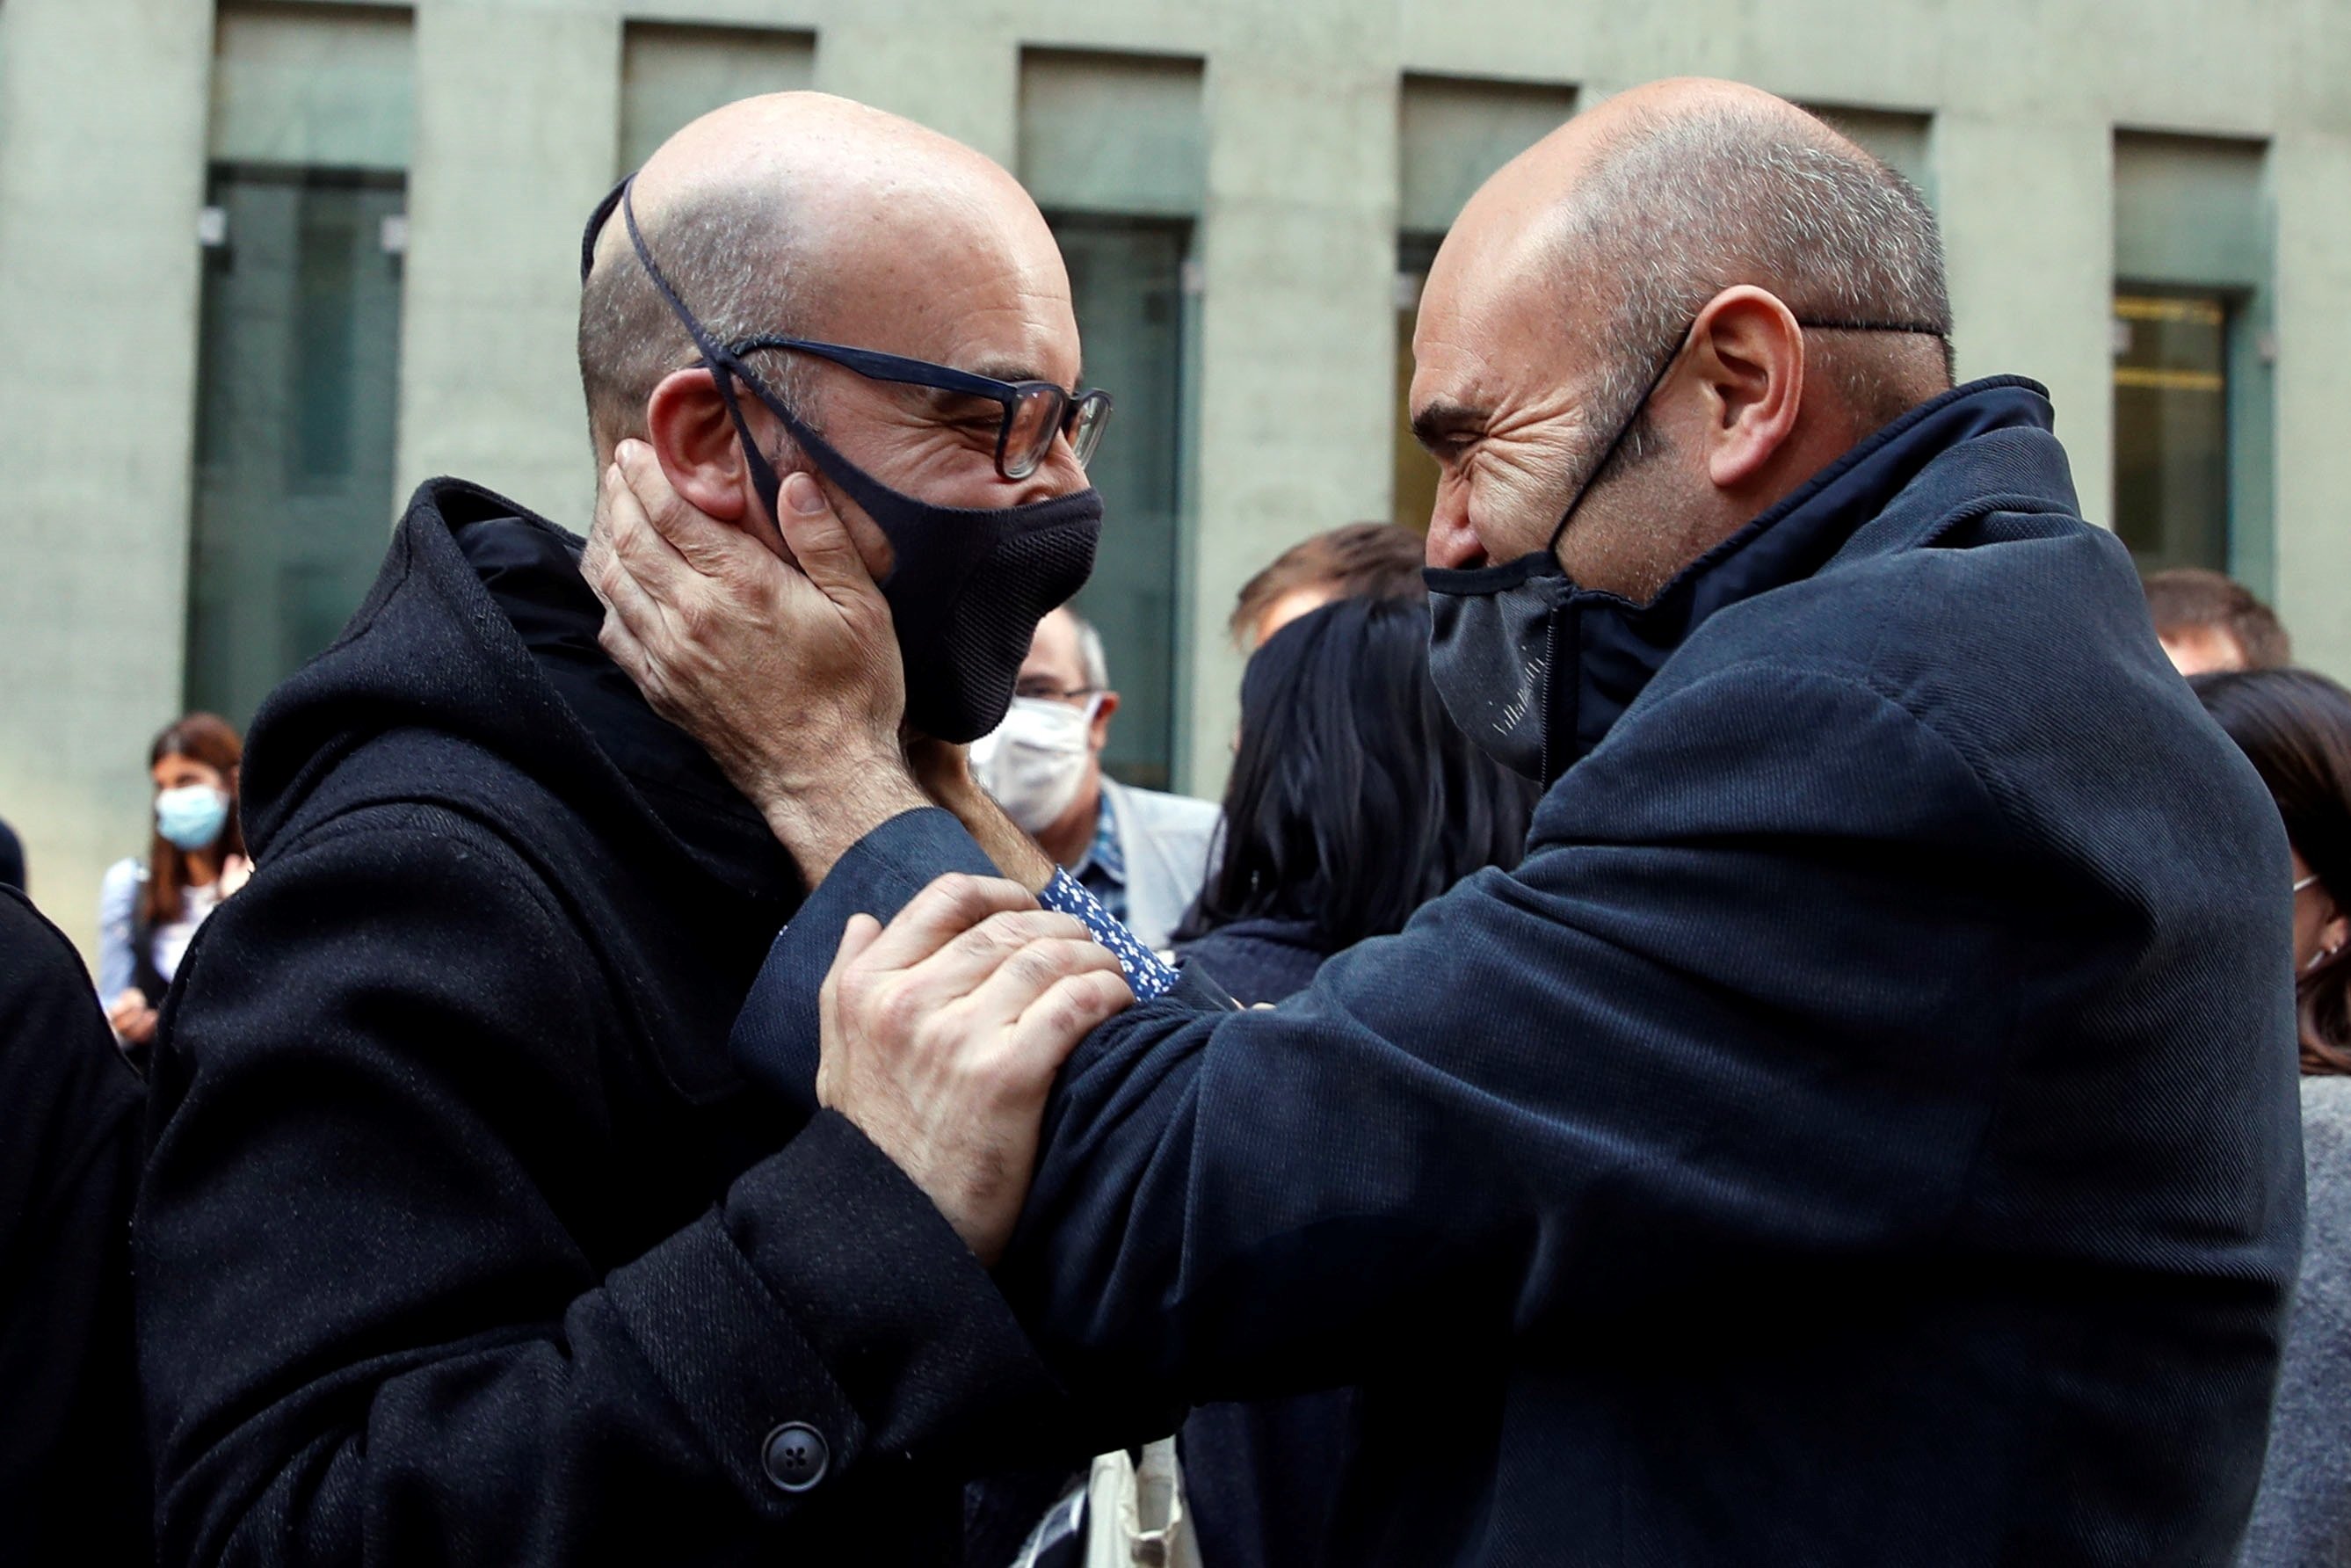 All 21 people targeted by Civil Guard "fear" operation in Catalonia now released